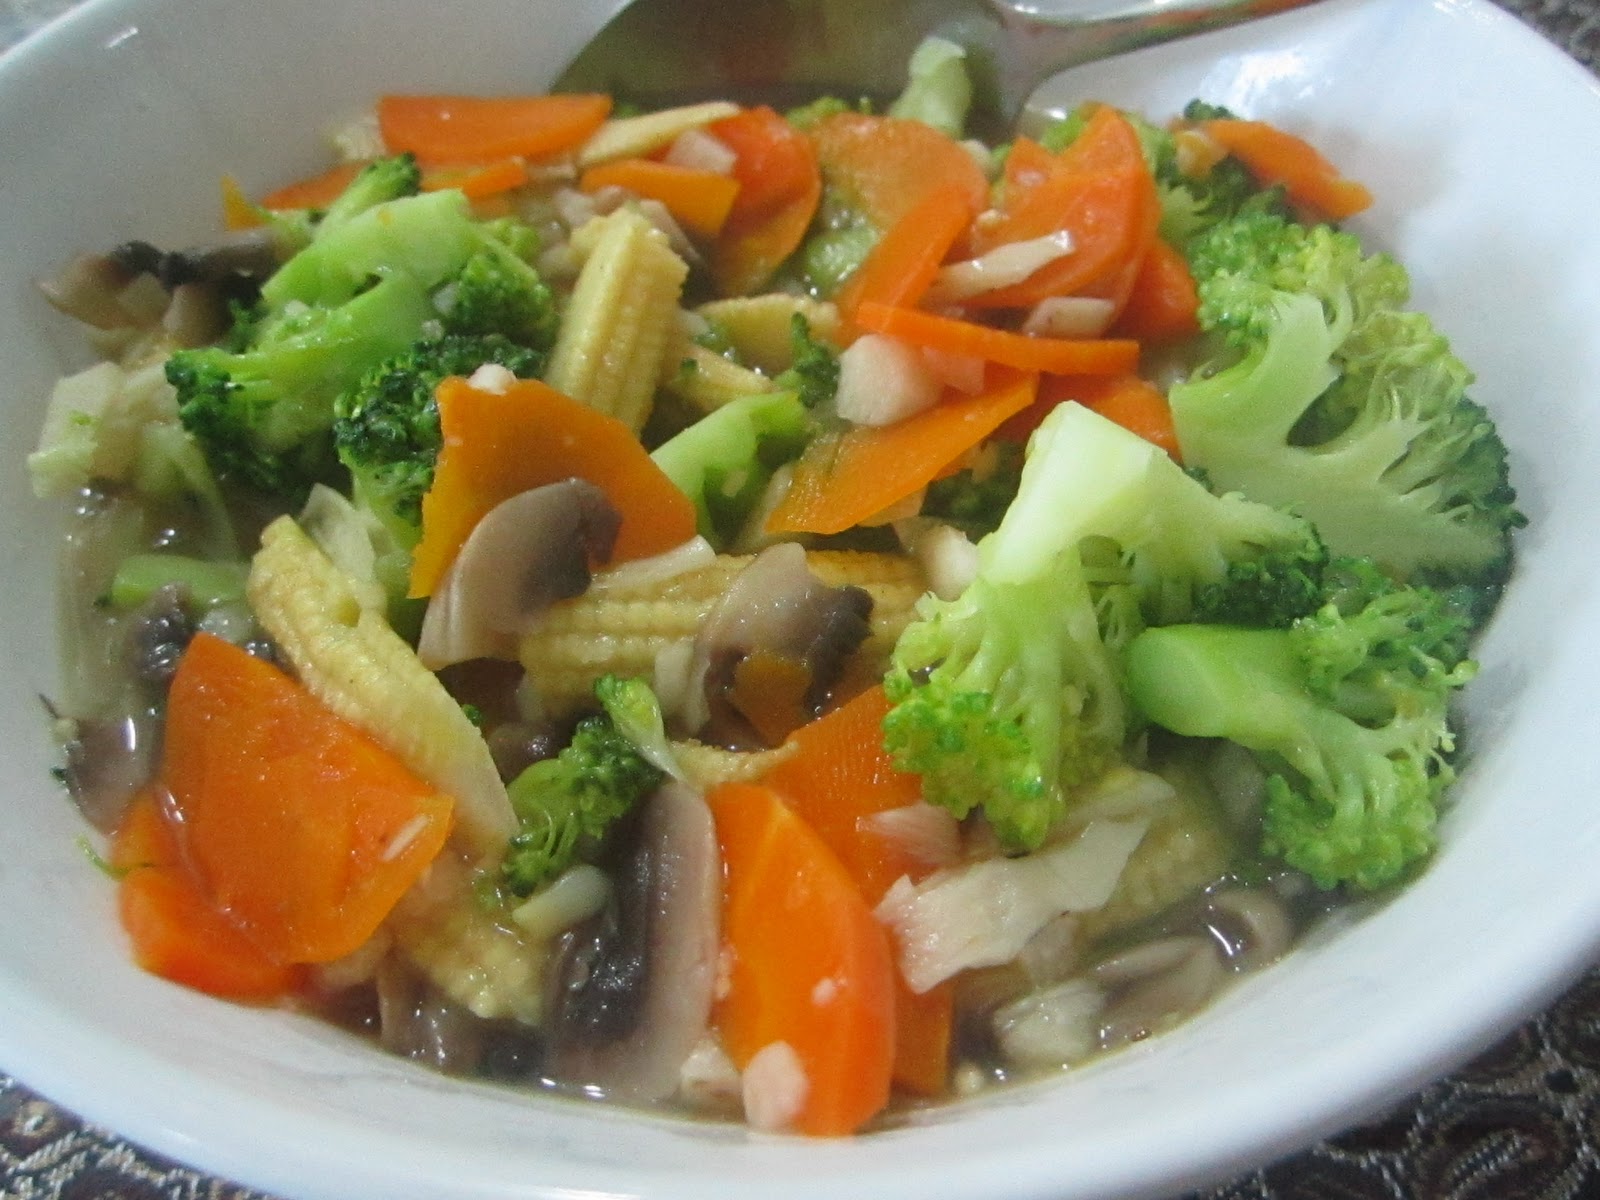 Chai chap mixed chinese vegetables resepi style stir chicken fry ayam mikahaziq recipe